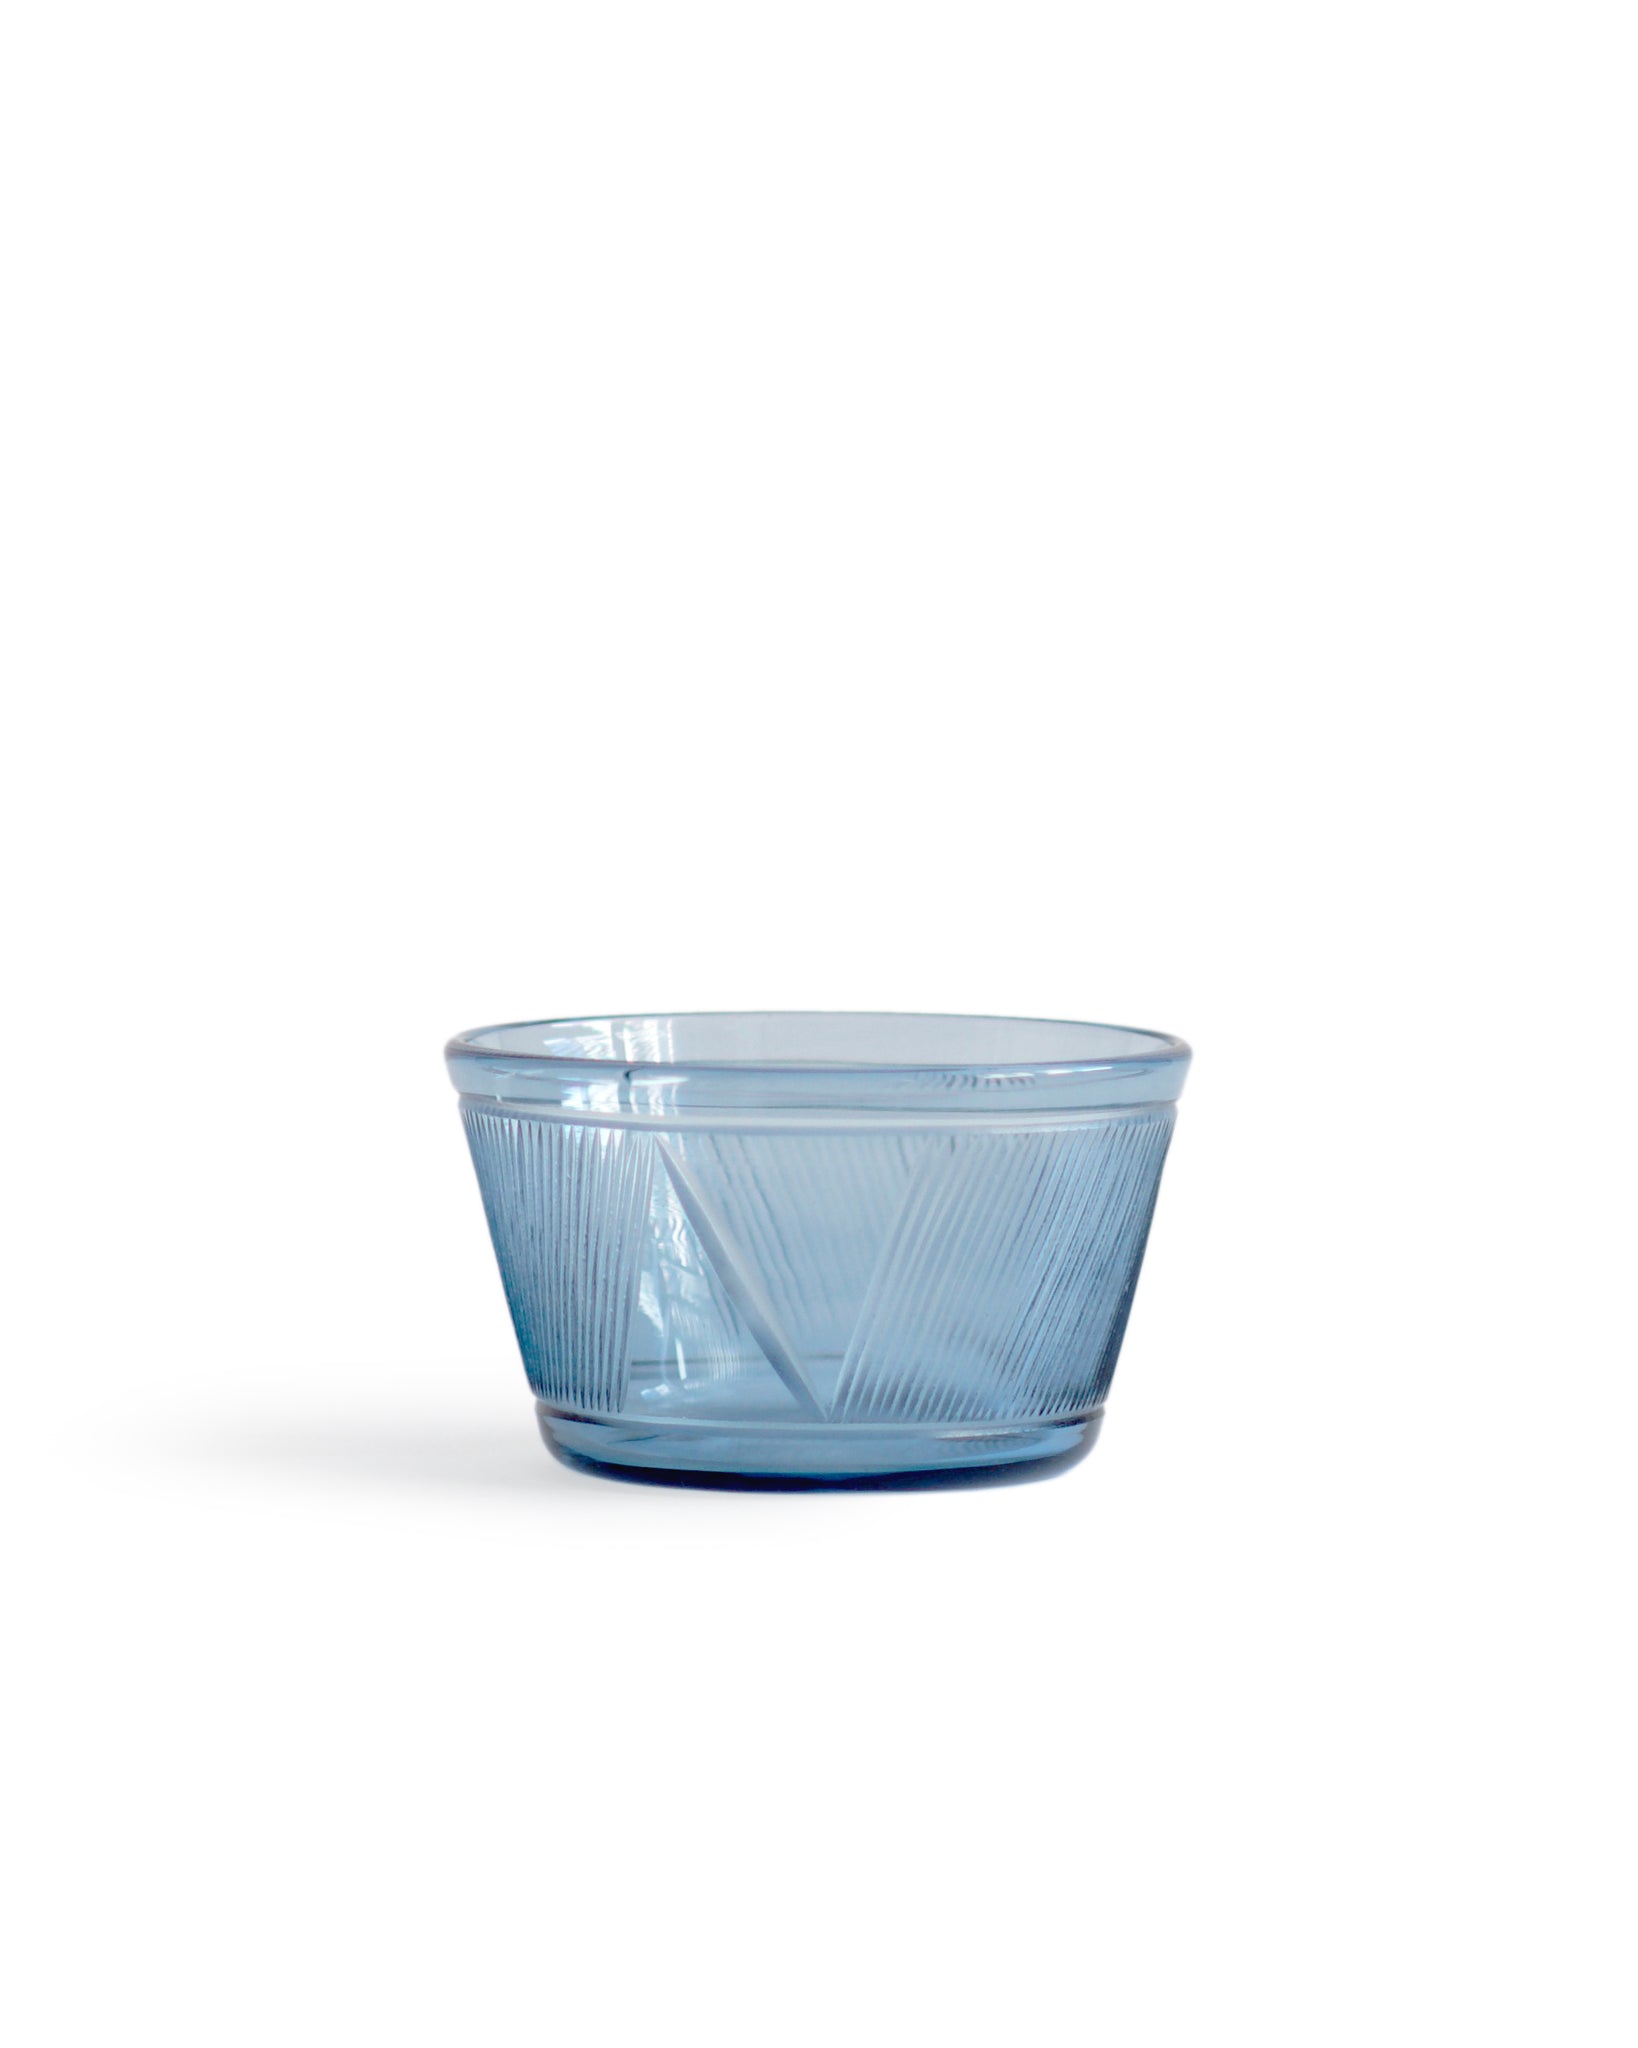 Silhouetted small reclaimed blue square bowl against white background.